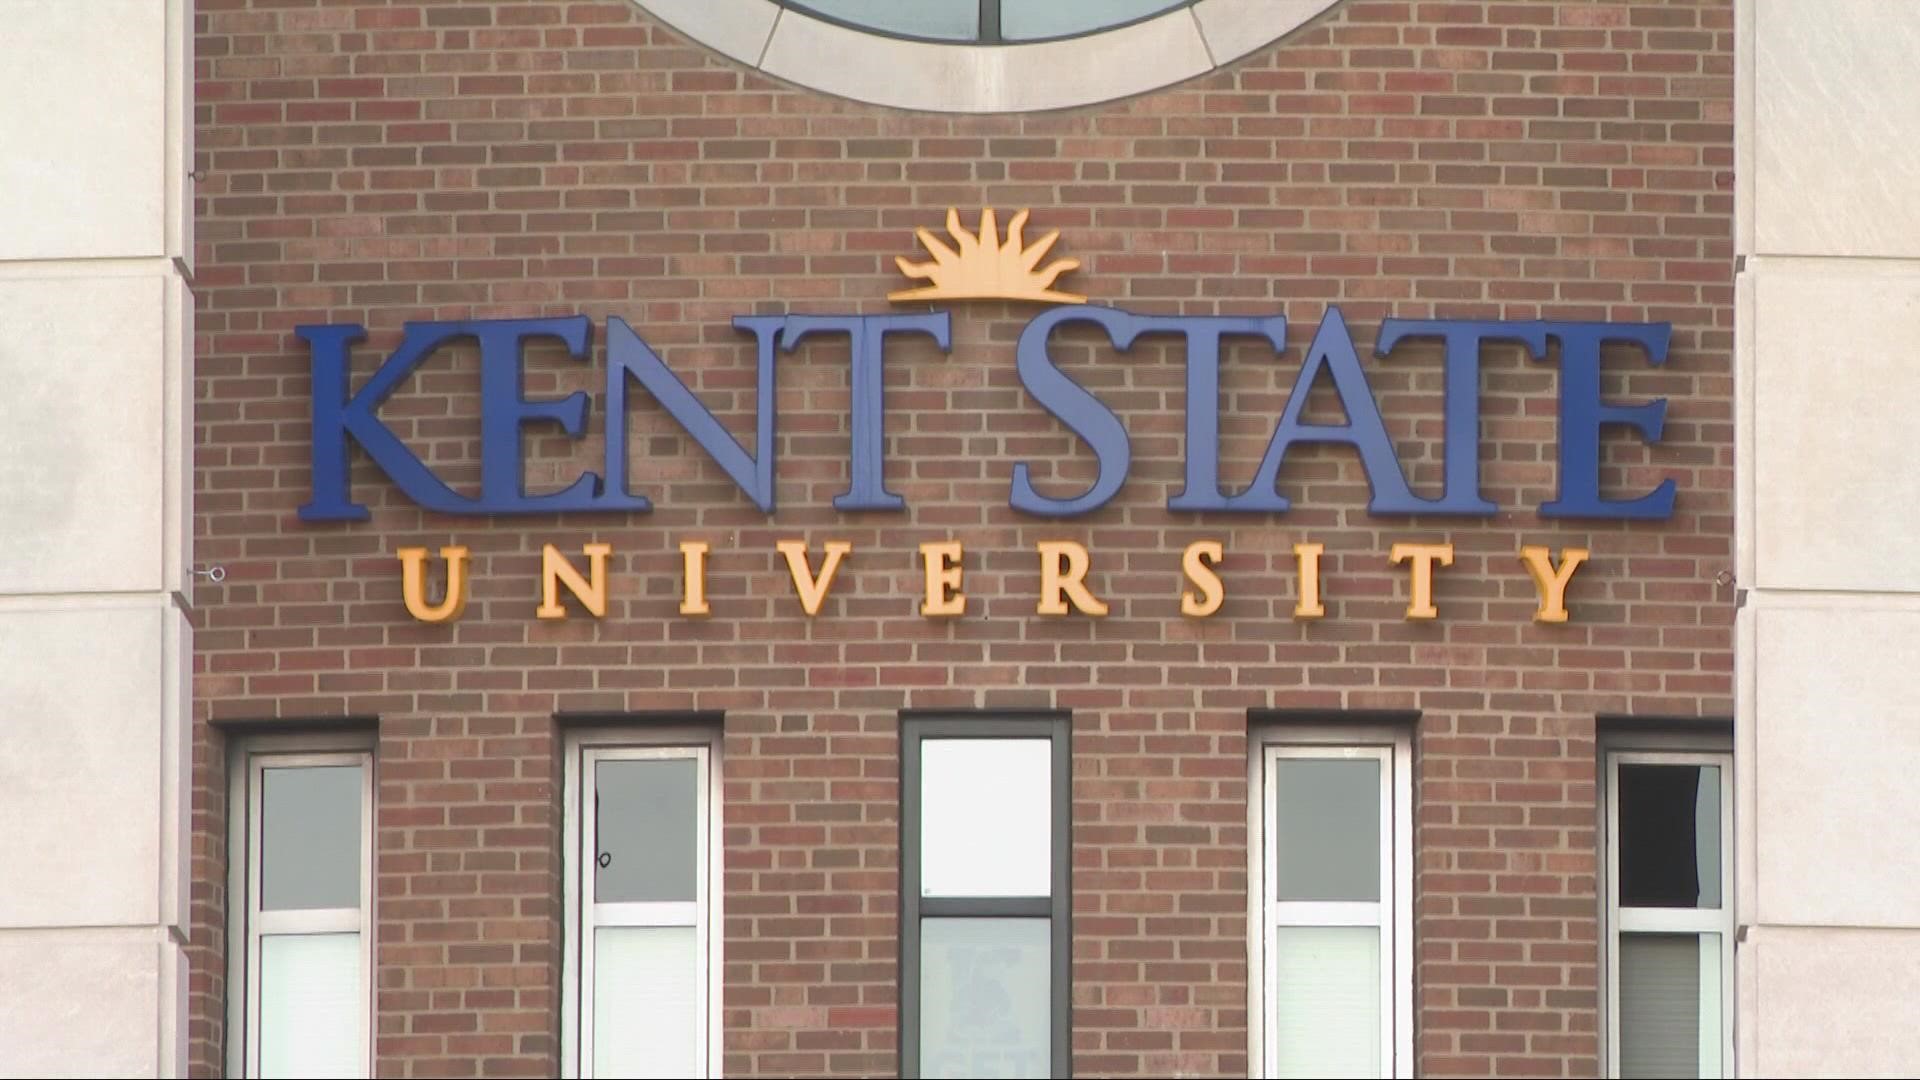 Police at Kent State University are investigating “the recent appearance of a swastika” that was painted on campus.